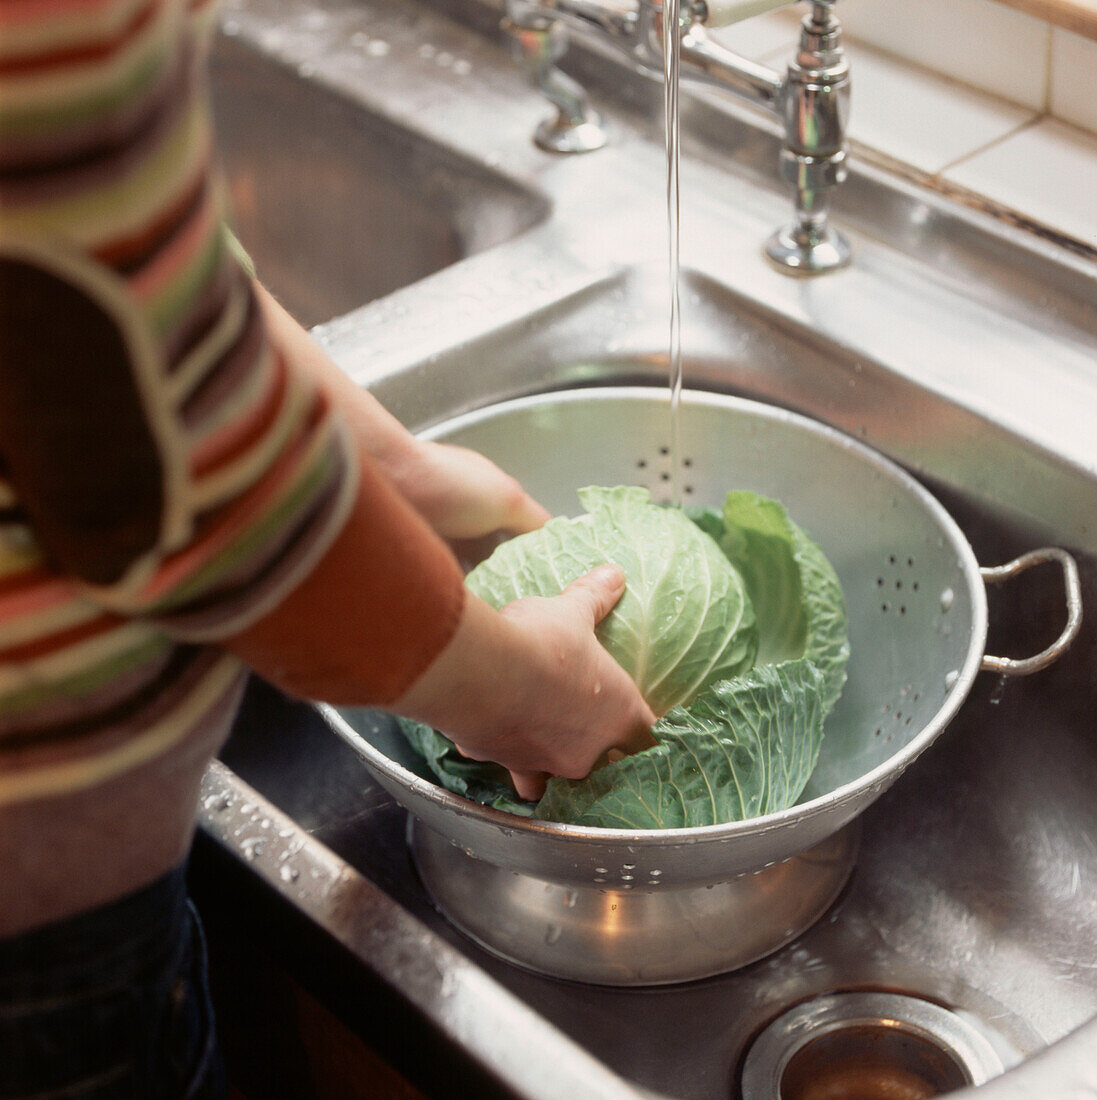 Woman washing a fresh cabbage under cold water in a stainless steel kitchen sink